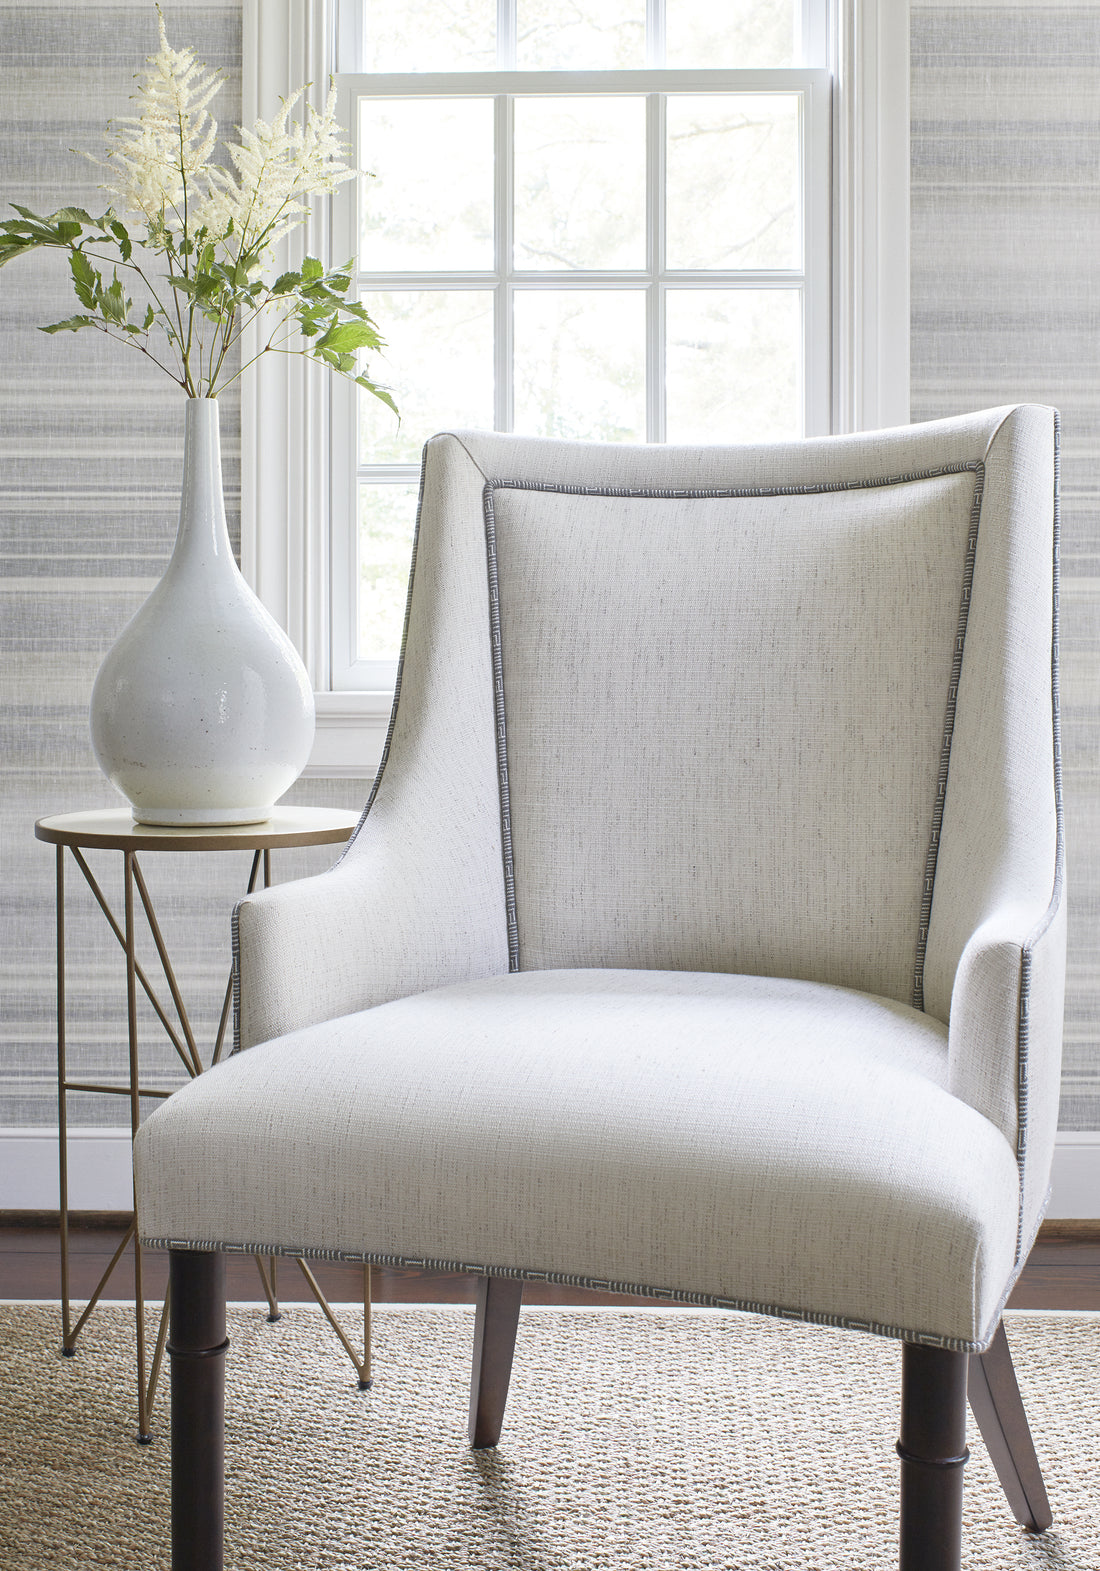 Palisades Dining Chair in Brooks woven fabric in flax color - pattern number W73375 by Thibaut in the Nomad collection